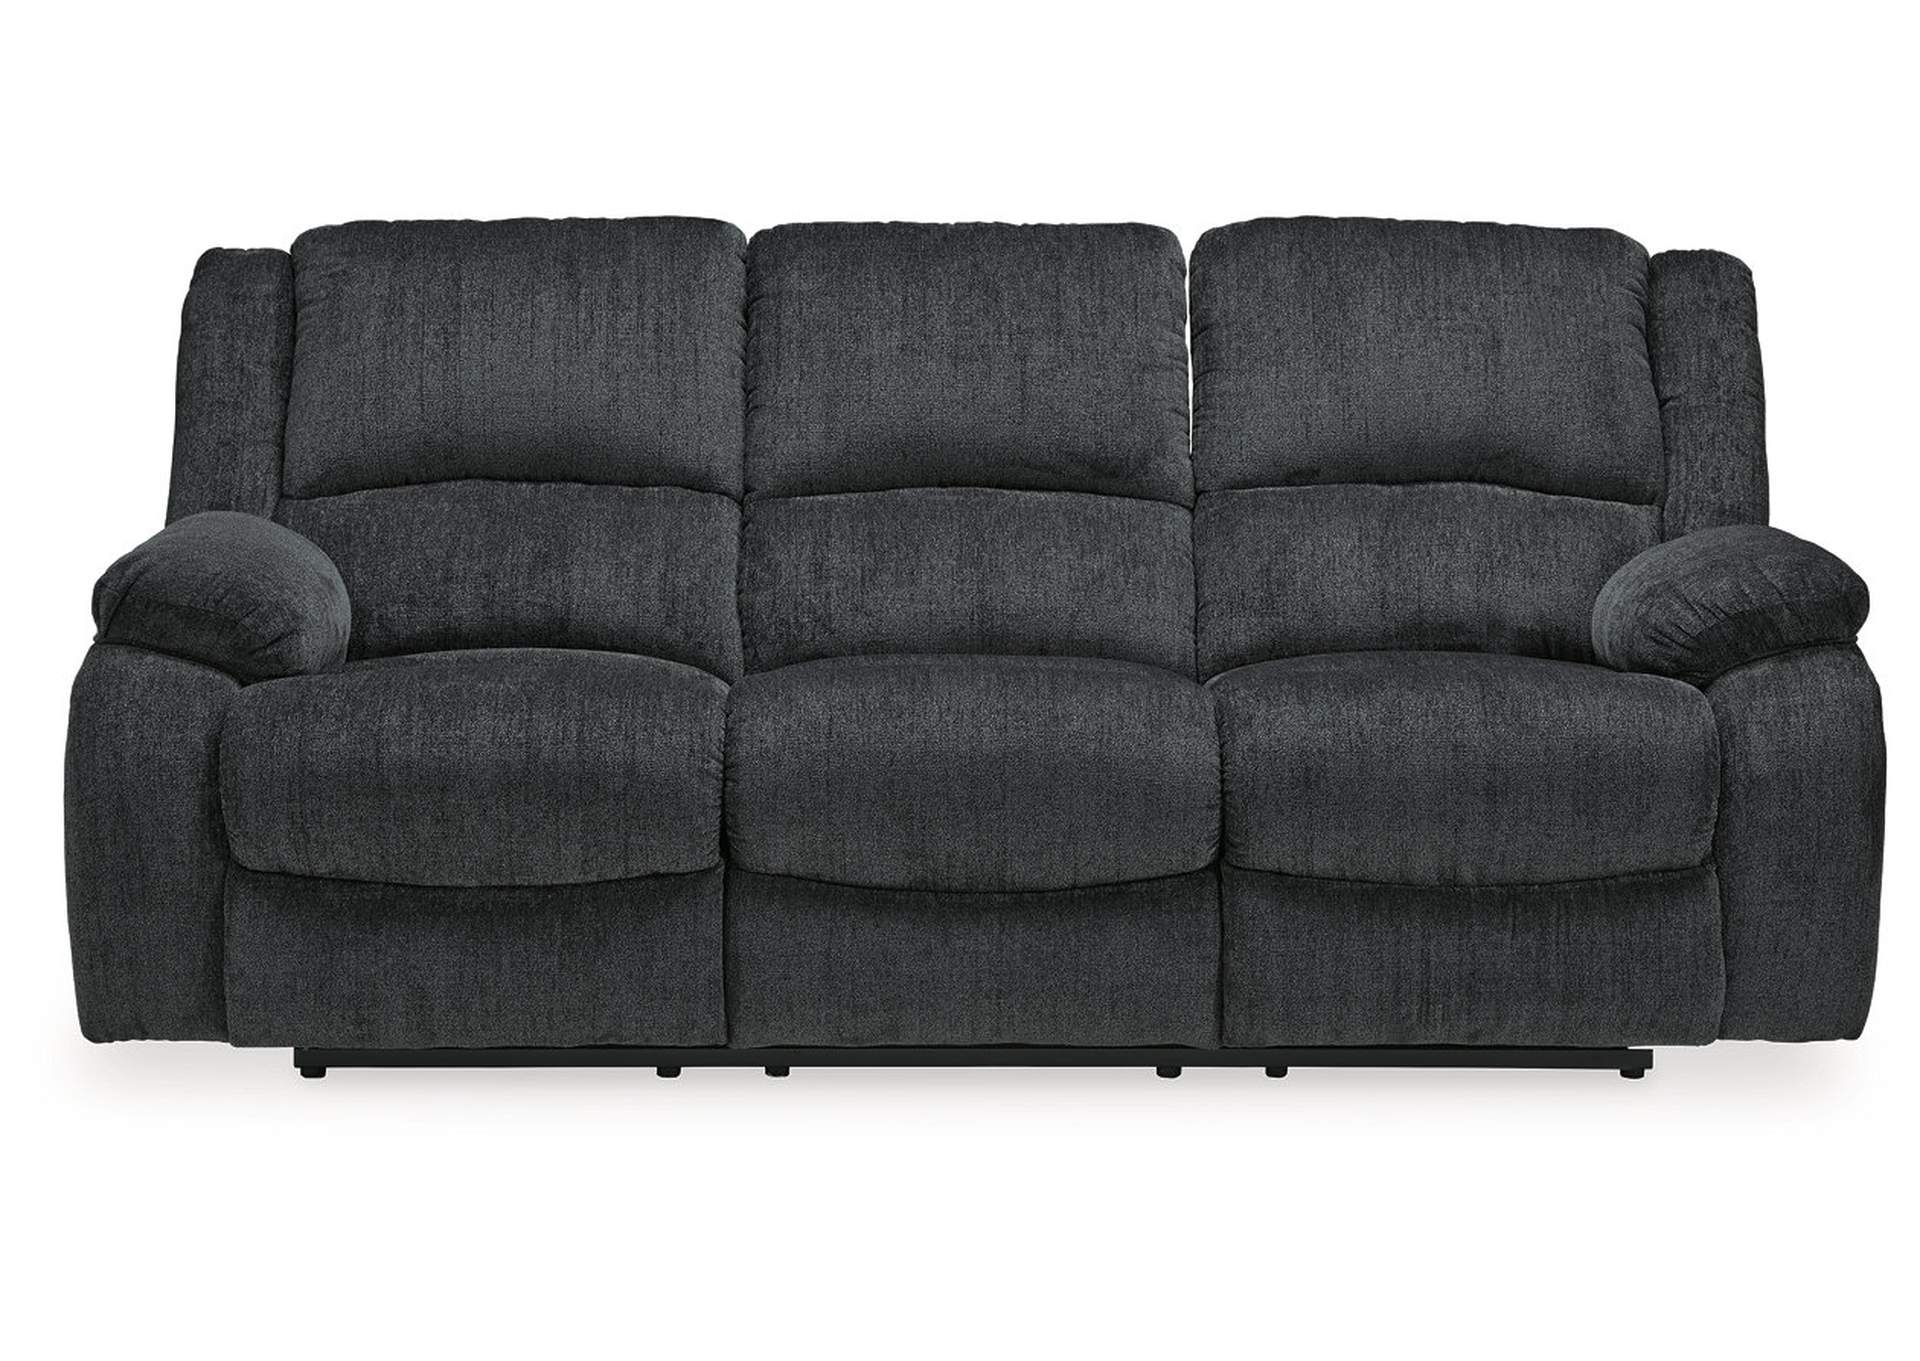 Draycoll Reclining Sofa and Loveseat,Signature Design By Ashley